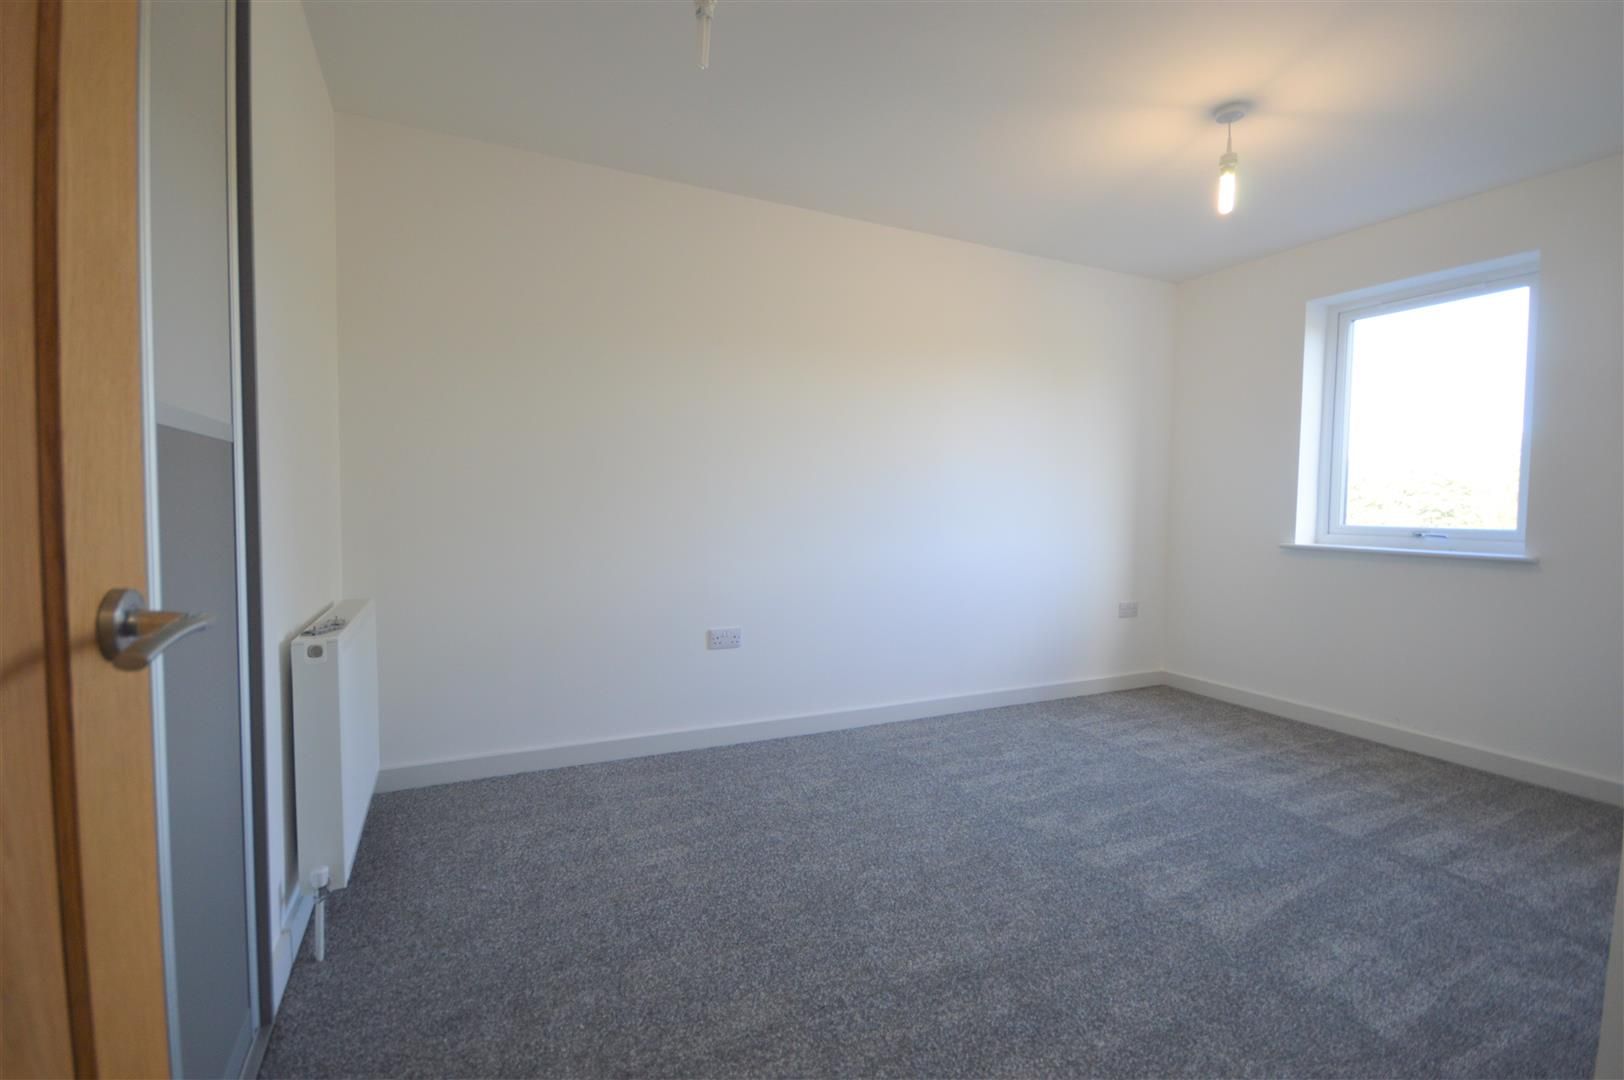 3 bed terraced for sale in Leominster 11